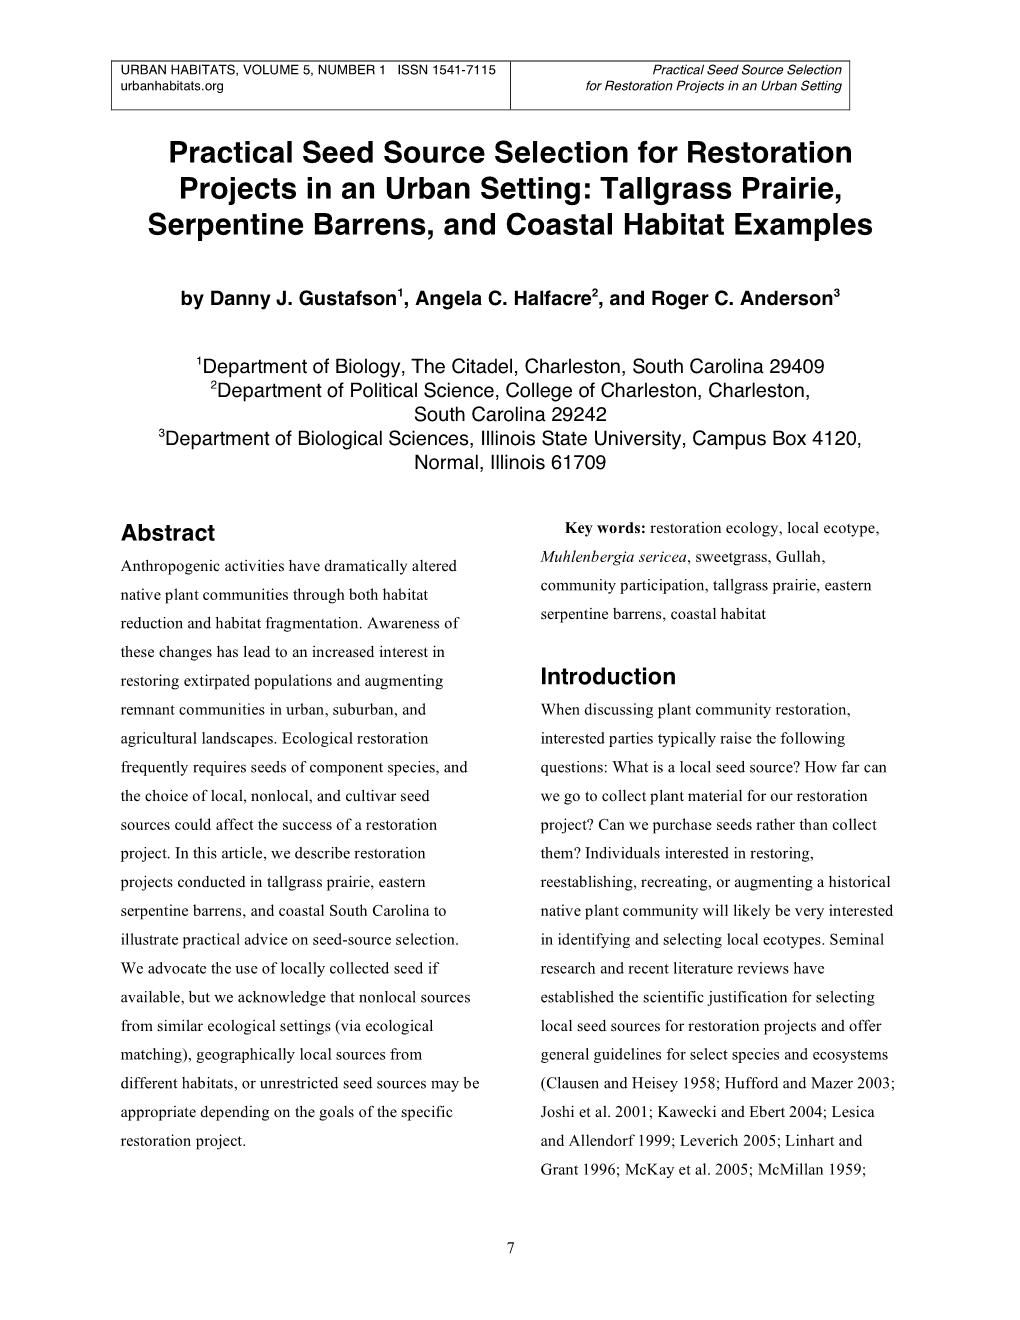 Practical Seed Source Selection for Restoration Projects in an Urban Setting: Tallgrass Prairie, Serpentine Barrens, and Coastal Habitat Examples